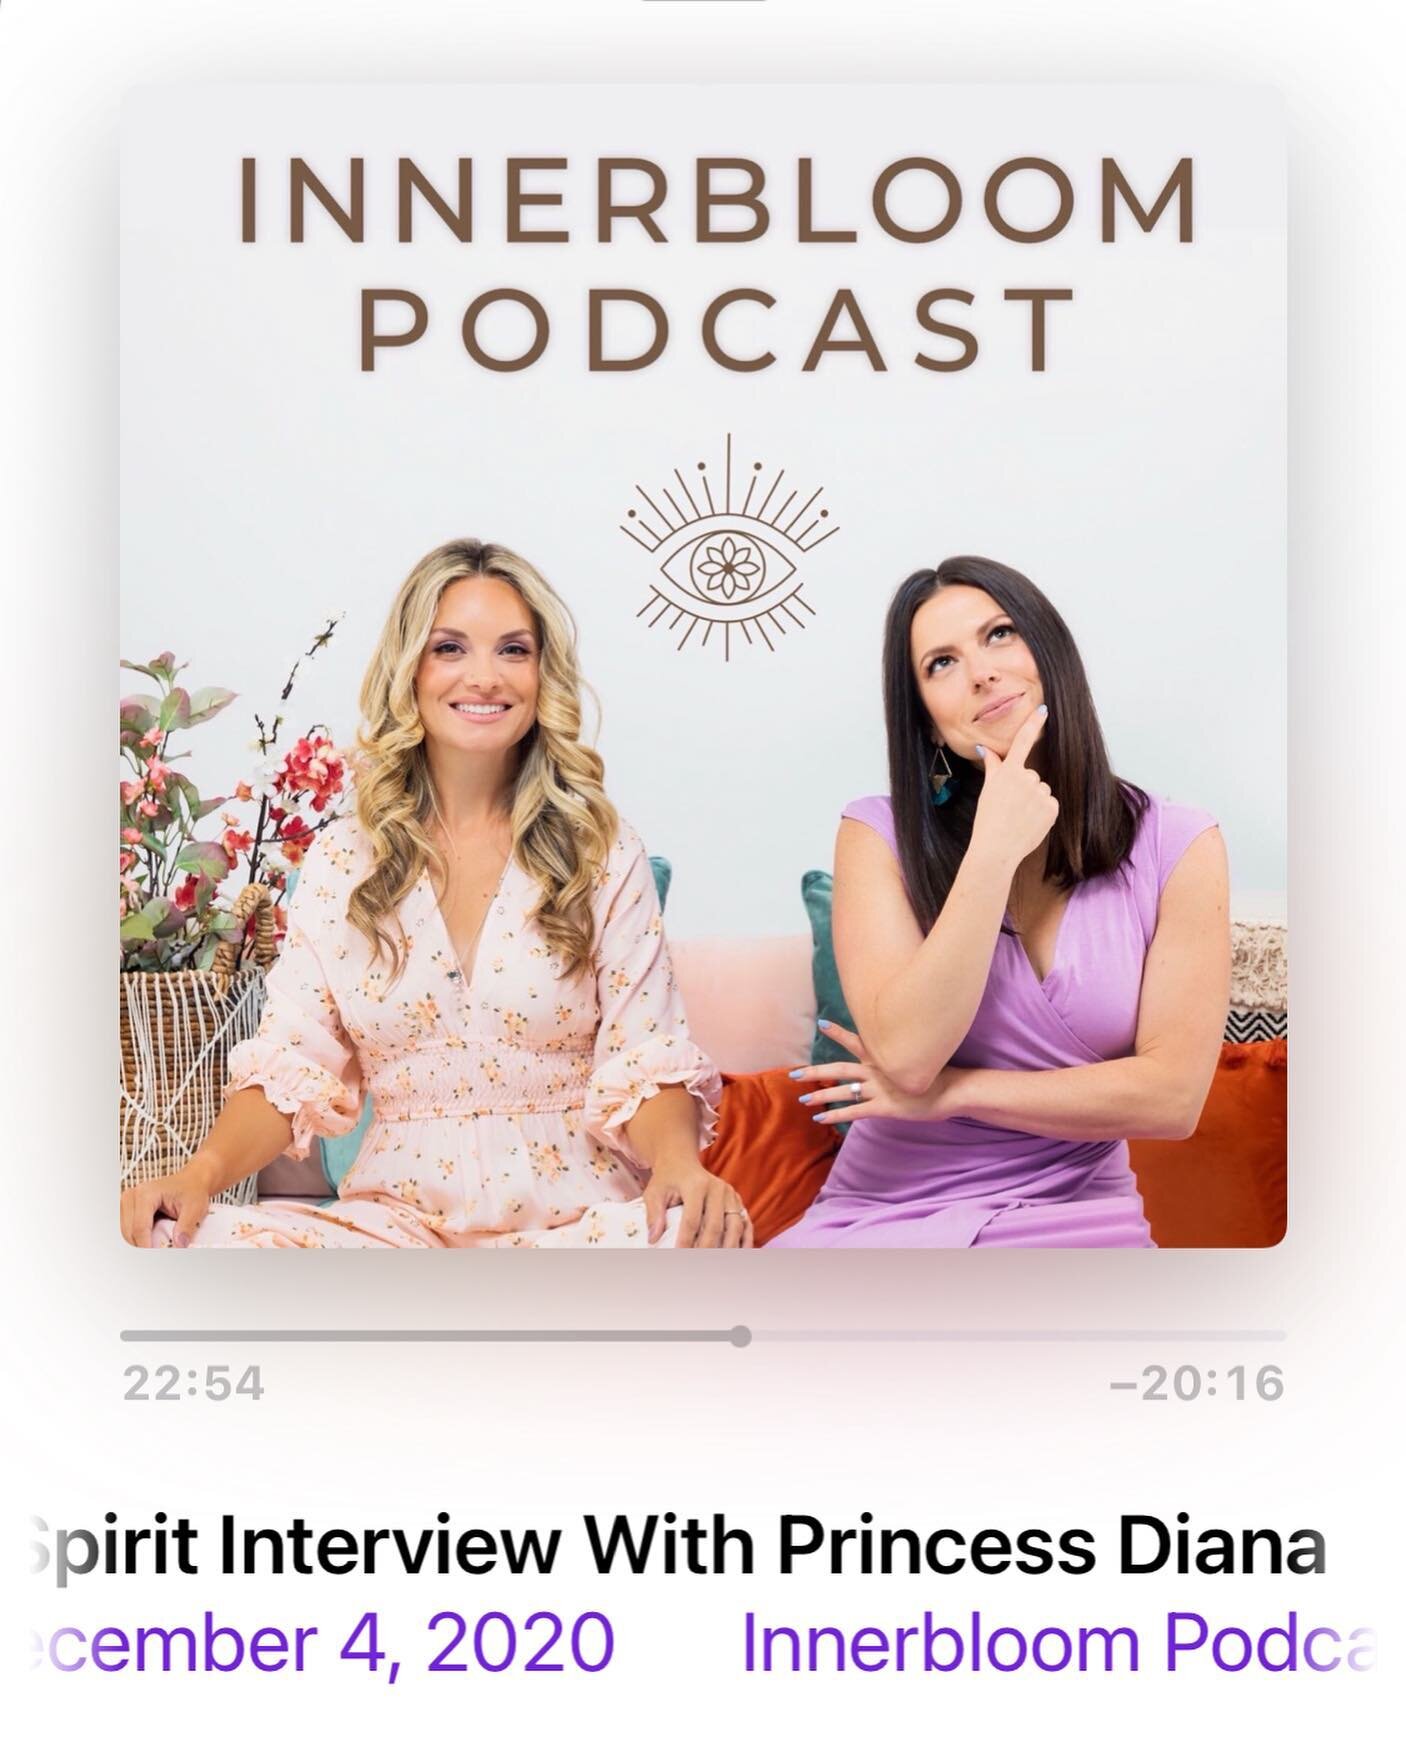 We did a celebrity spirit interview with Princess Diana a few months back on @innerbloompodcast (episode 338) and she shared some insight ab Meghan / Harry and why they left, among other things. 

Was just listening back and it gives some more contex